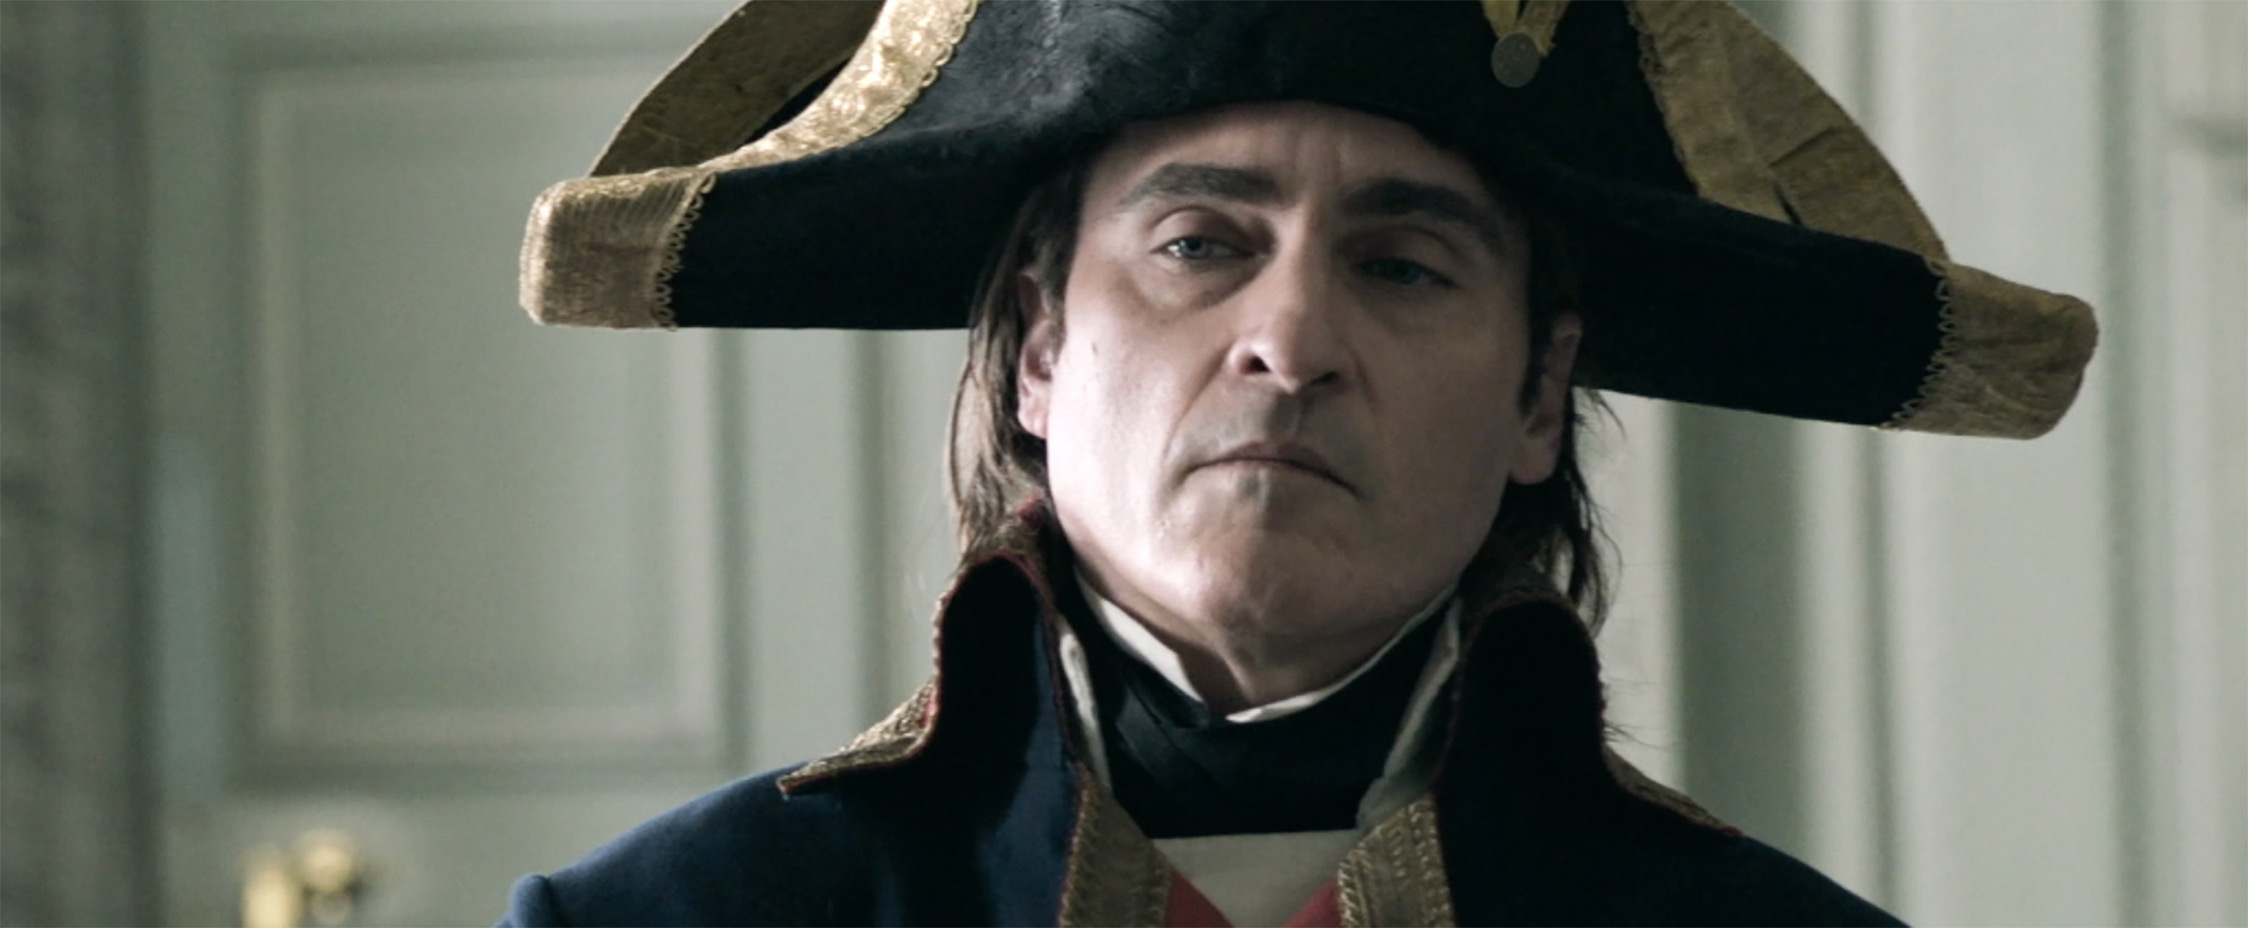 A new look at Ridley Scott's epic Napoleon doesn't come up short - JB Hi-Fi